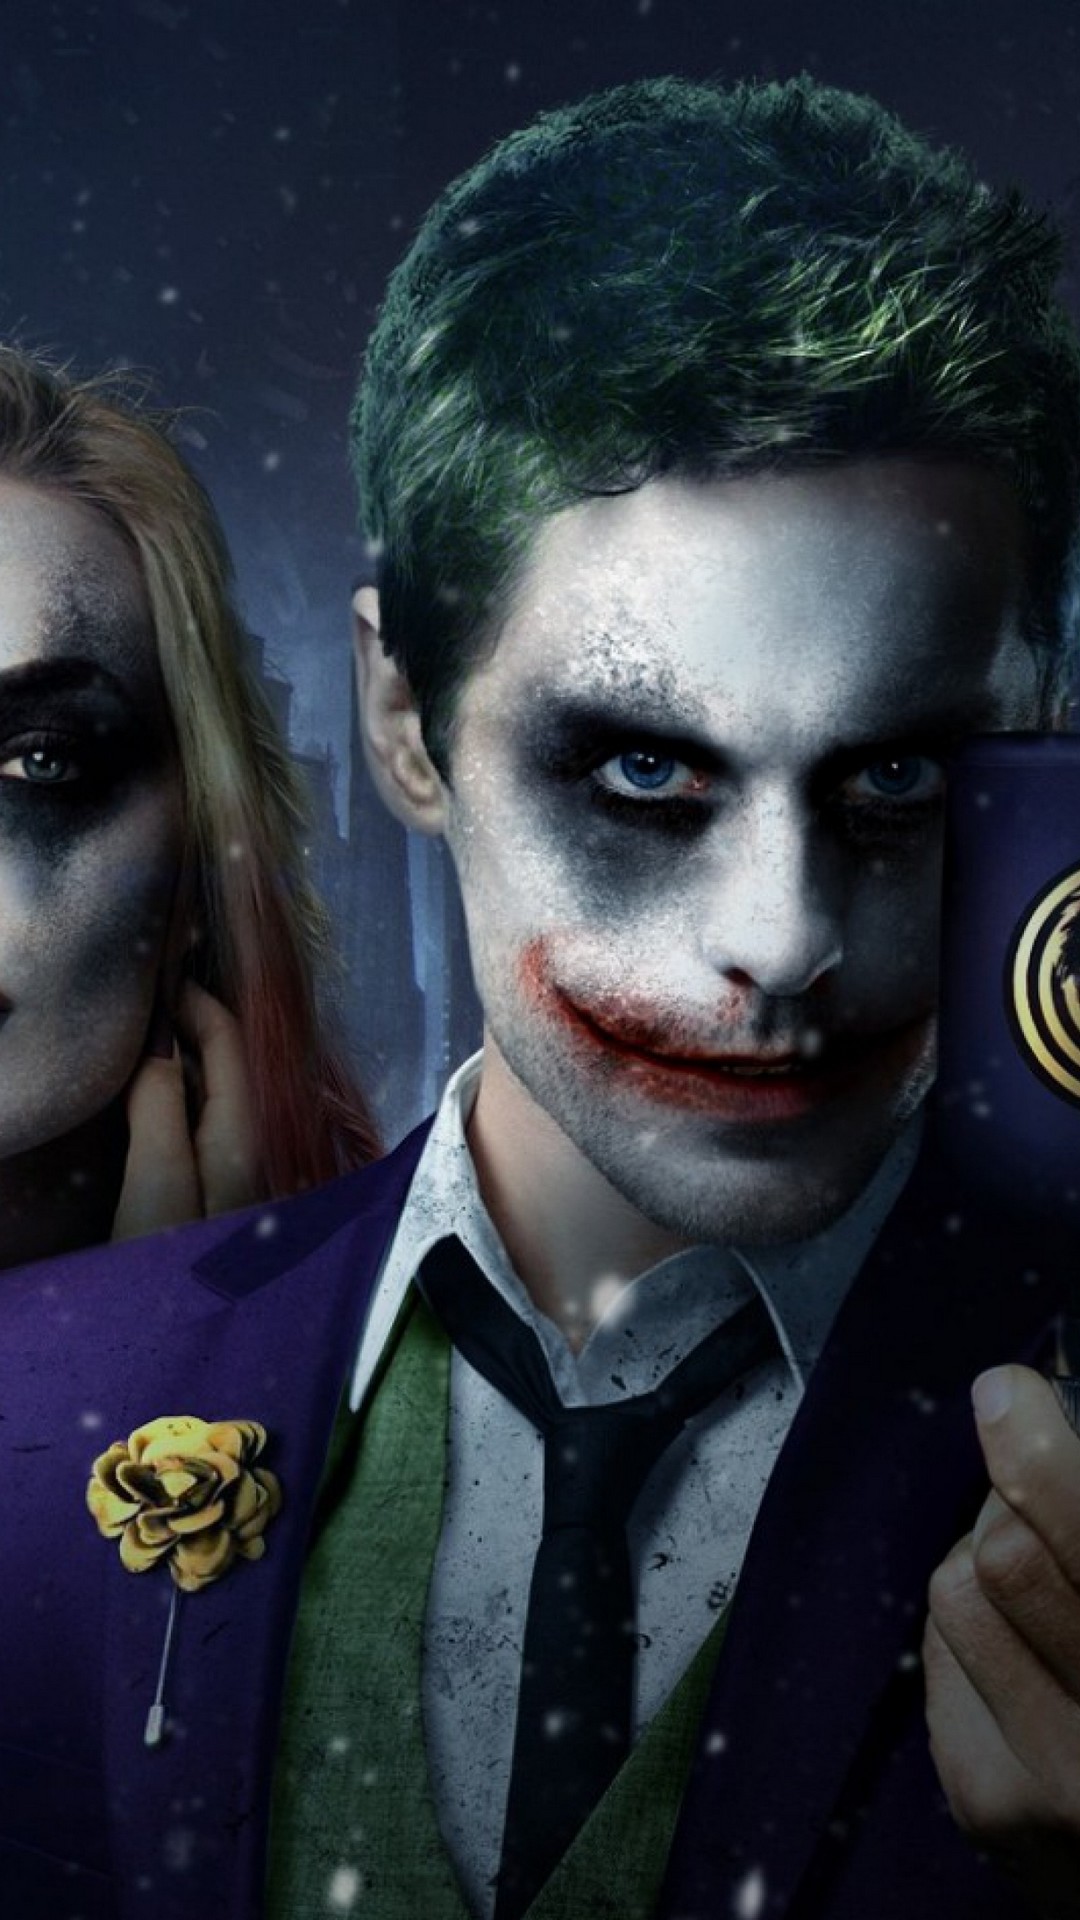 Wallpaper Harley Quinn And Joker Iphone With Image - Hd Joker Suicide Squad  - 1080x1920 Wallpaper 